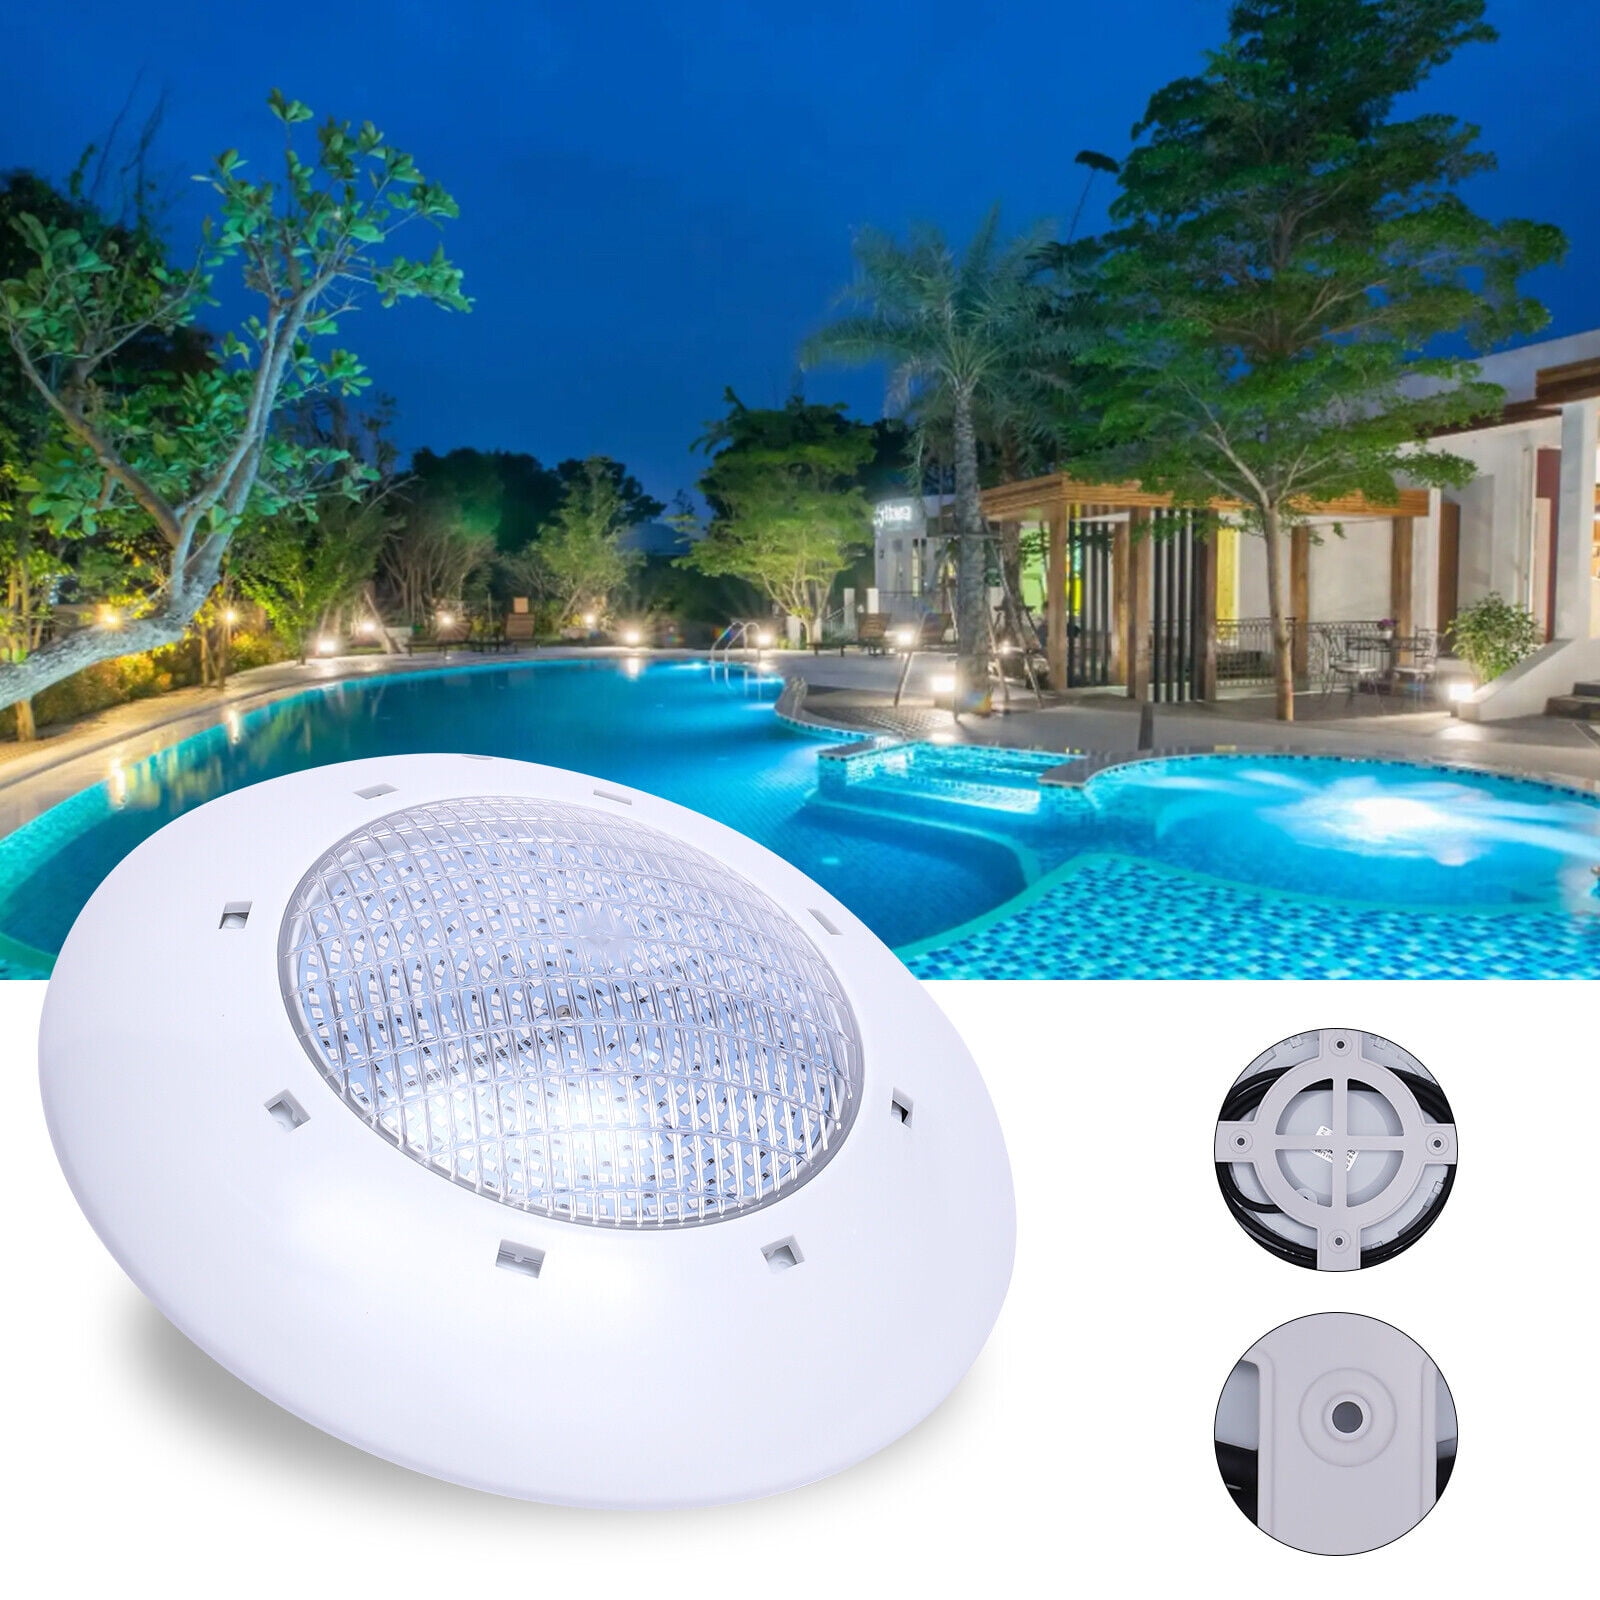 TFCFL ABS+PC Underwater Swimming Pool LED Light RGB Remote Controller IP68  12V 35W 